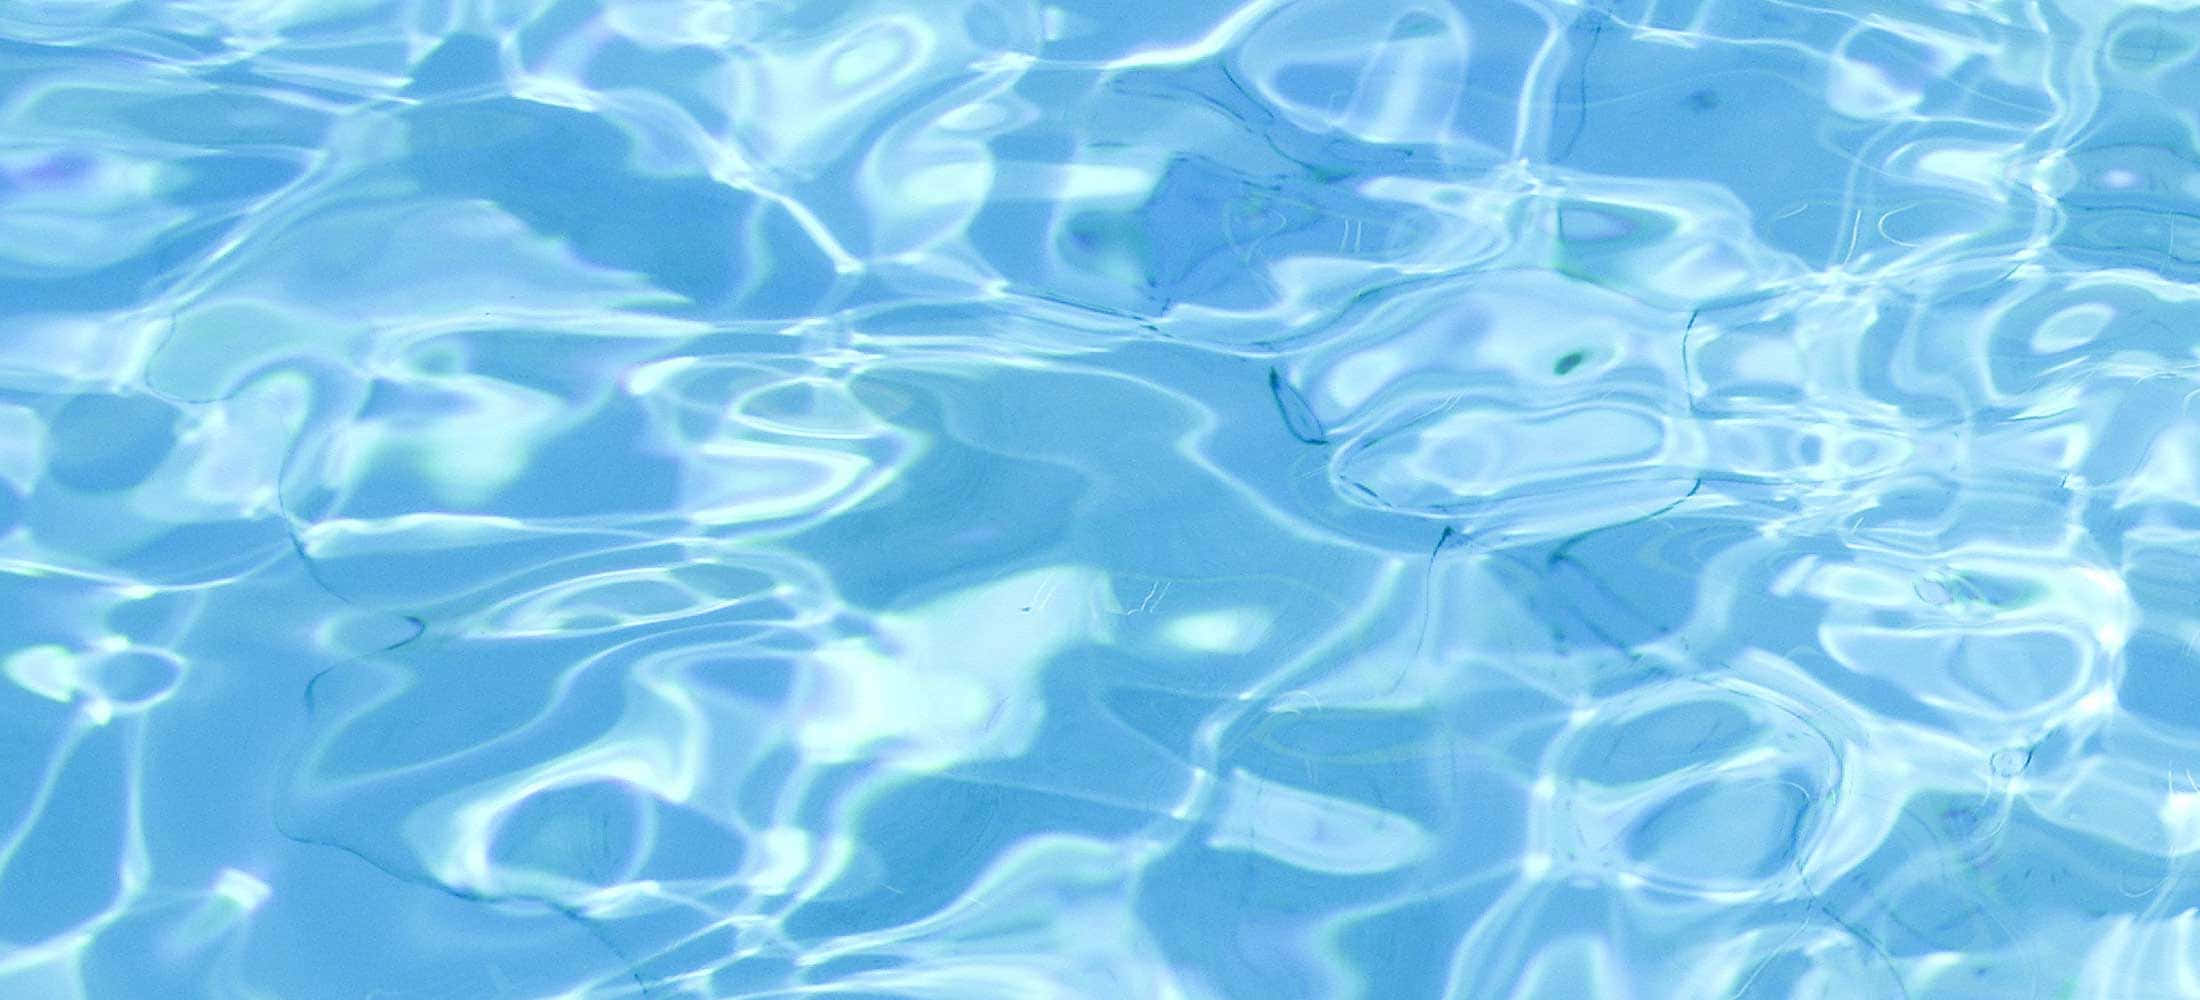 A Close Up Of A Blue Pool With Water Ripples